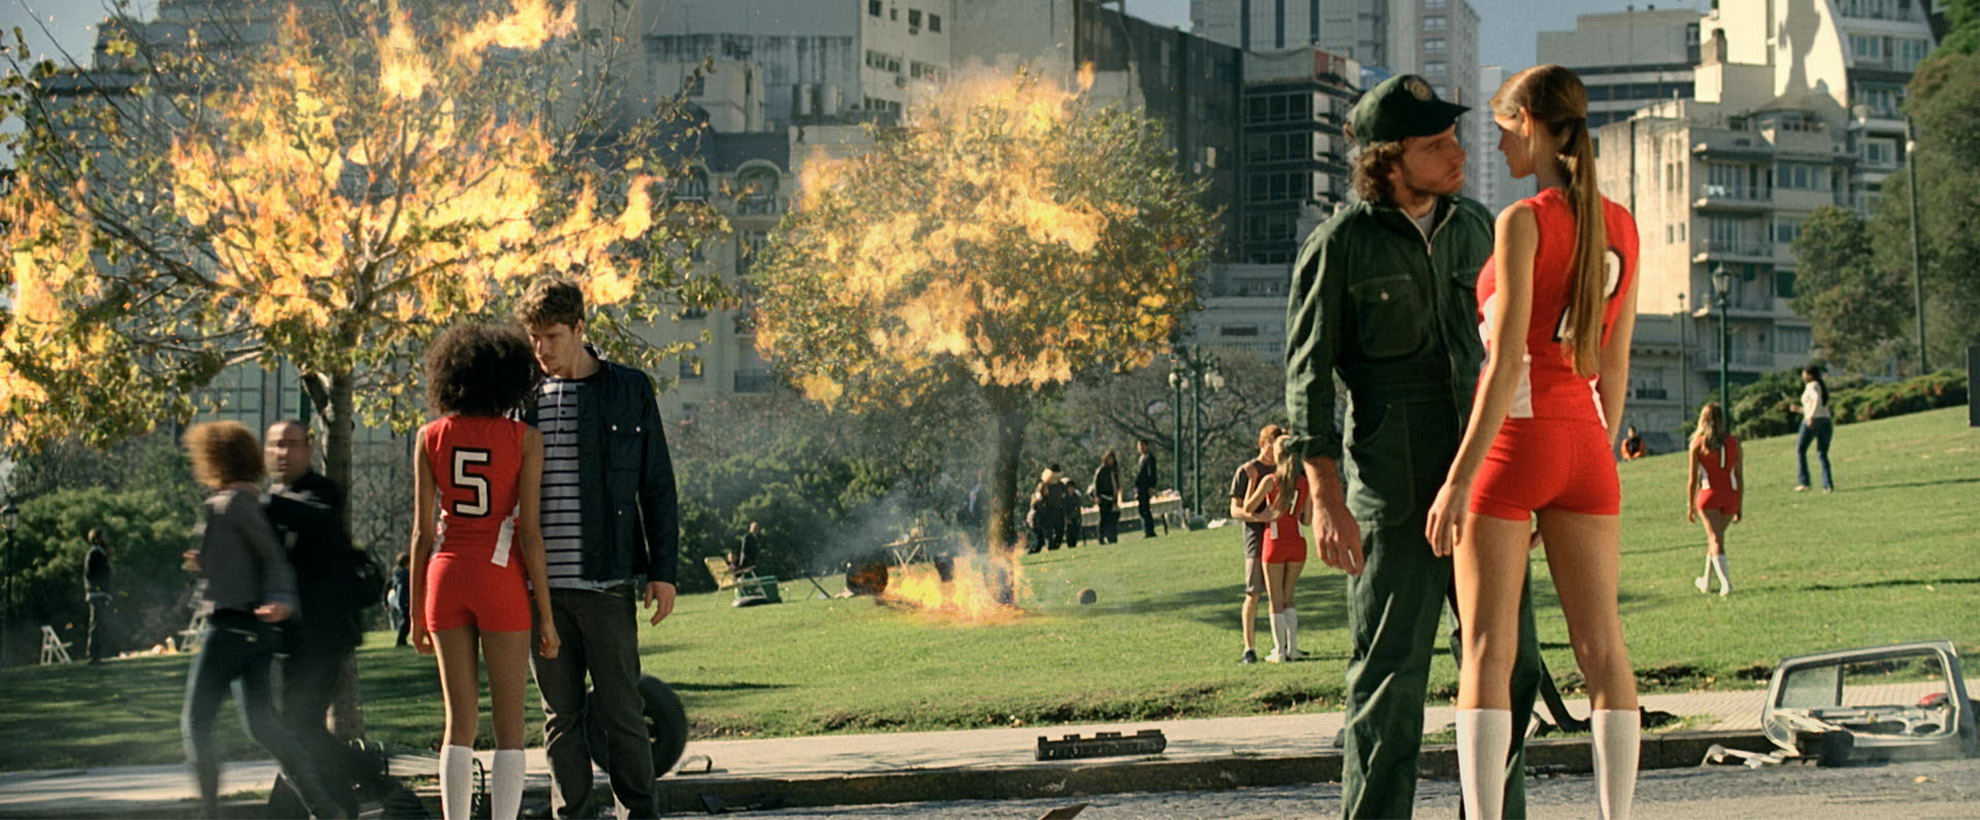 Trees are on fire as men and women stand in pairs of two staring at each other in a park.